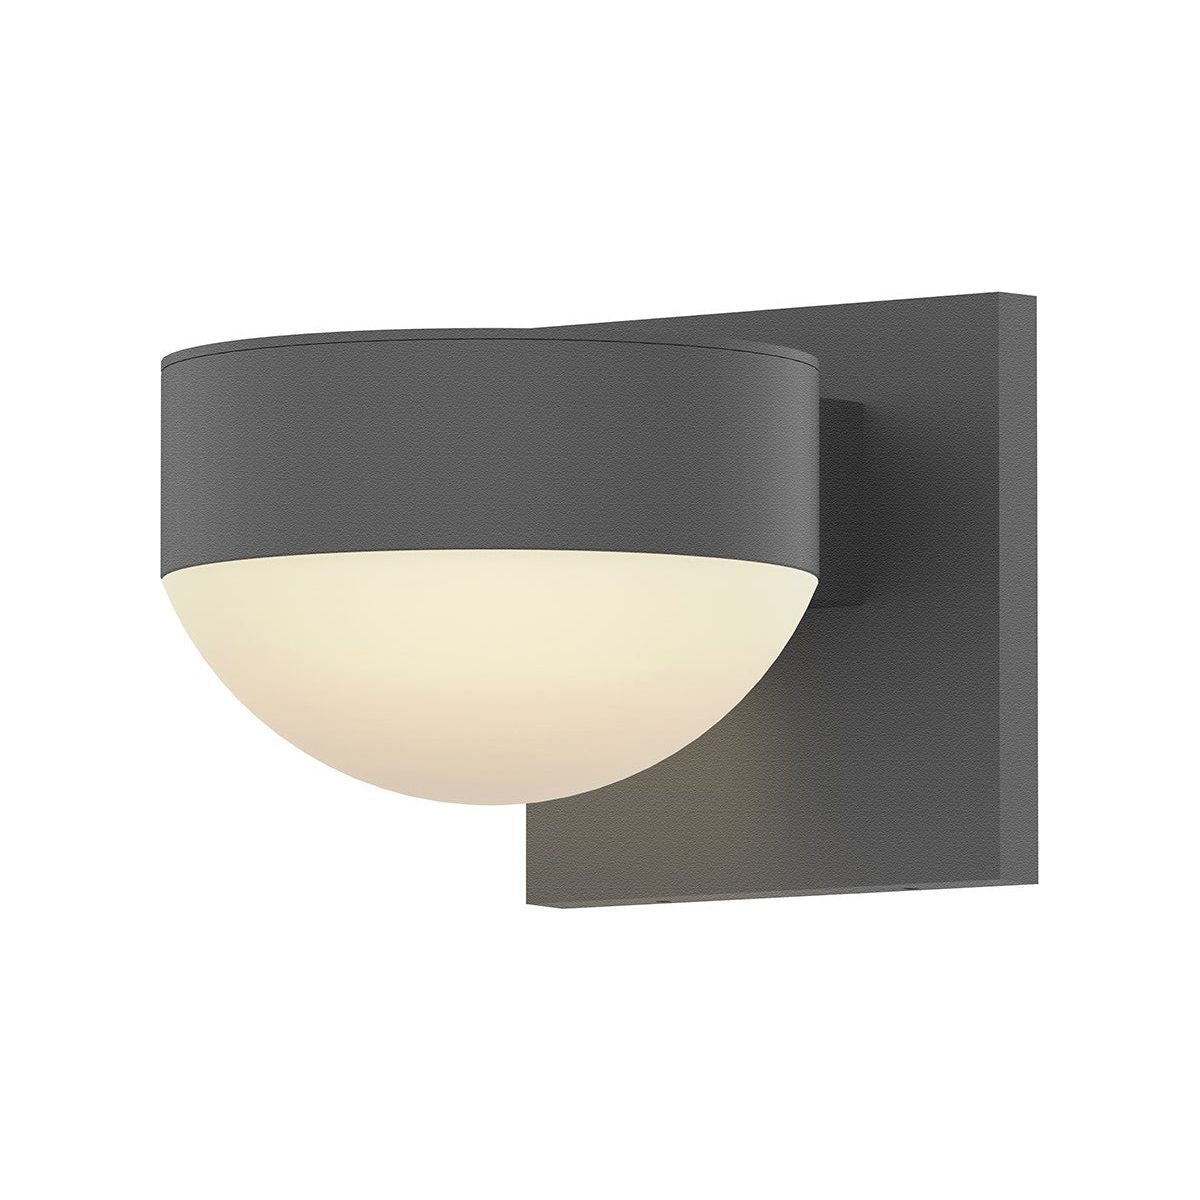 REALS Downlight LED Sconce with Plate Cap and Dome Lens